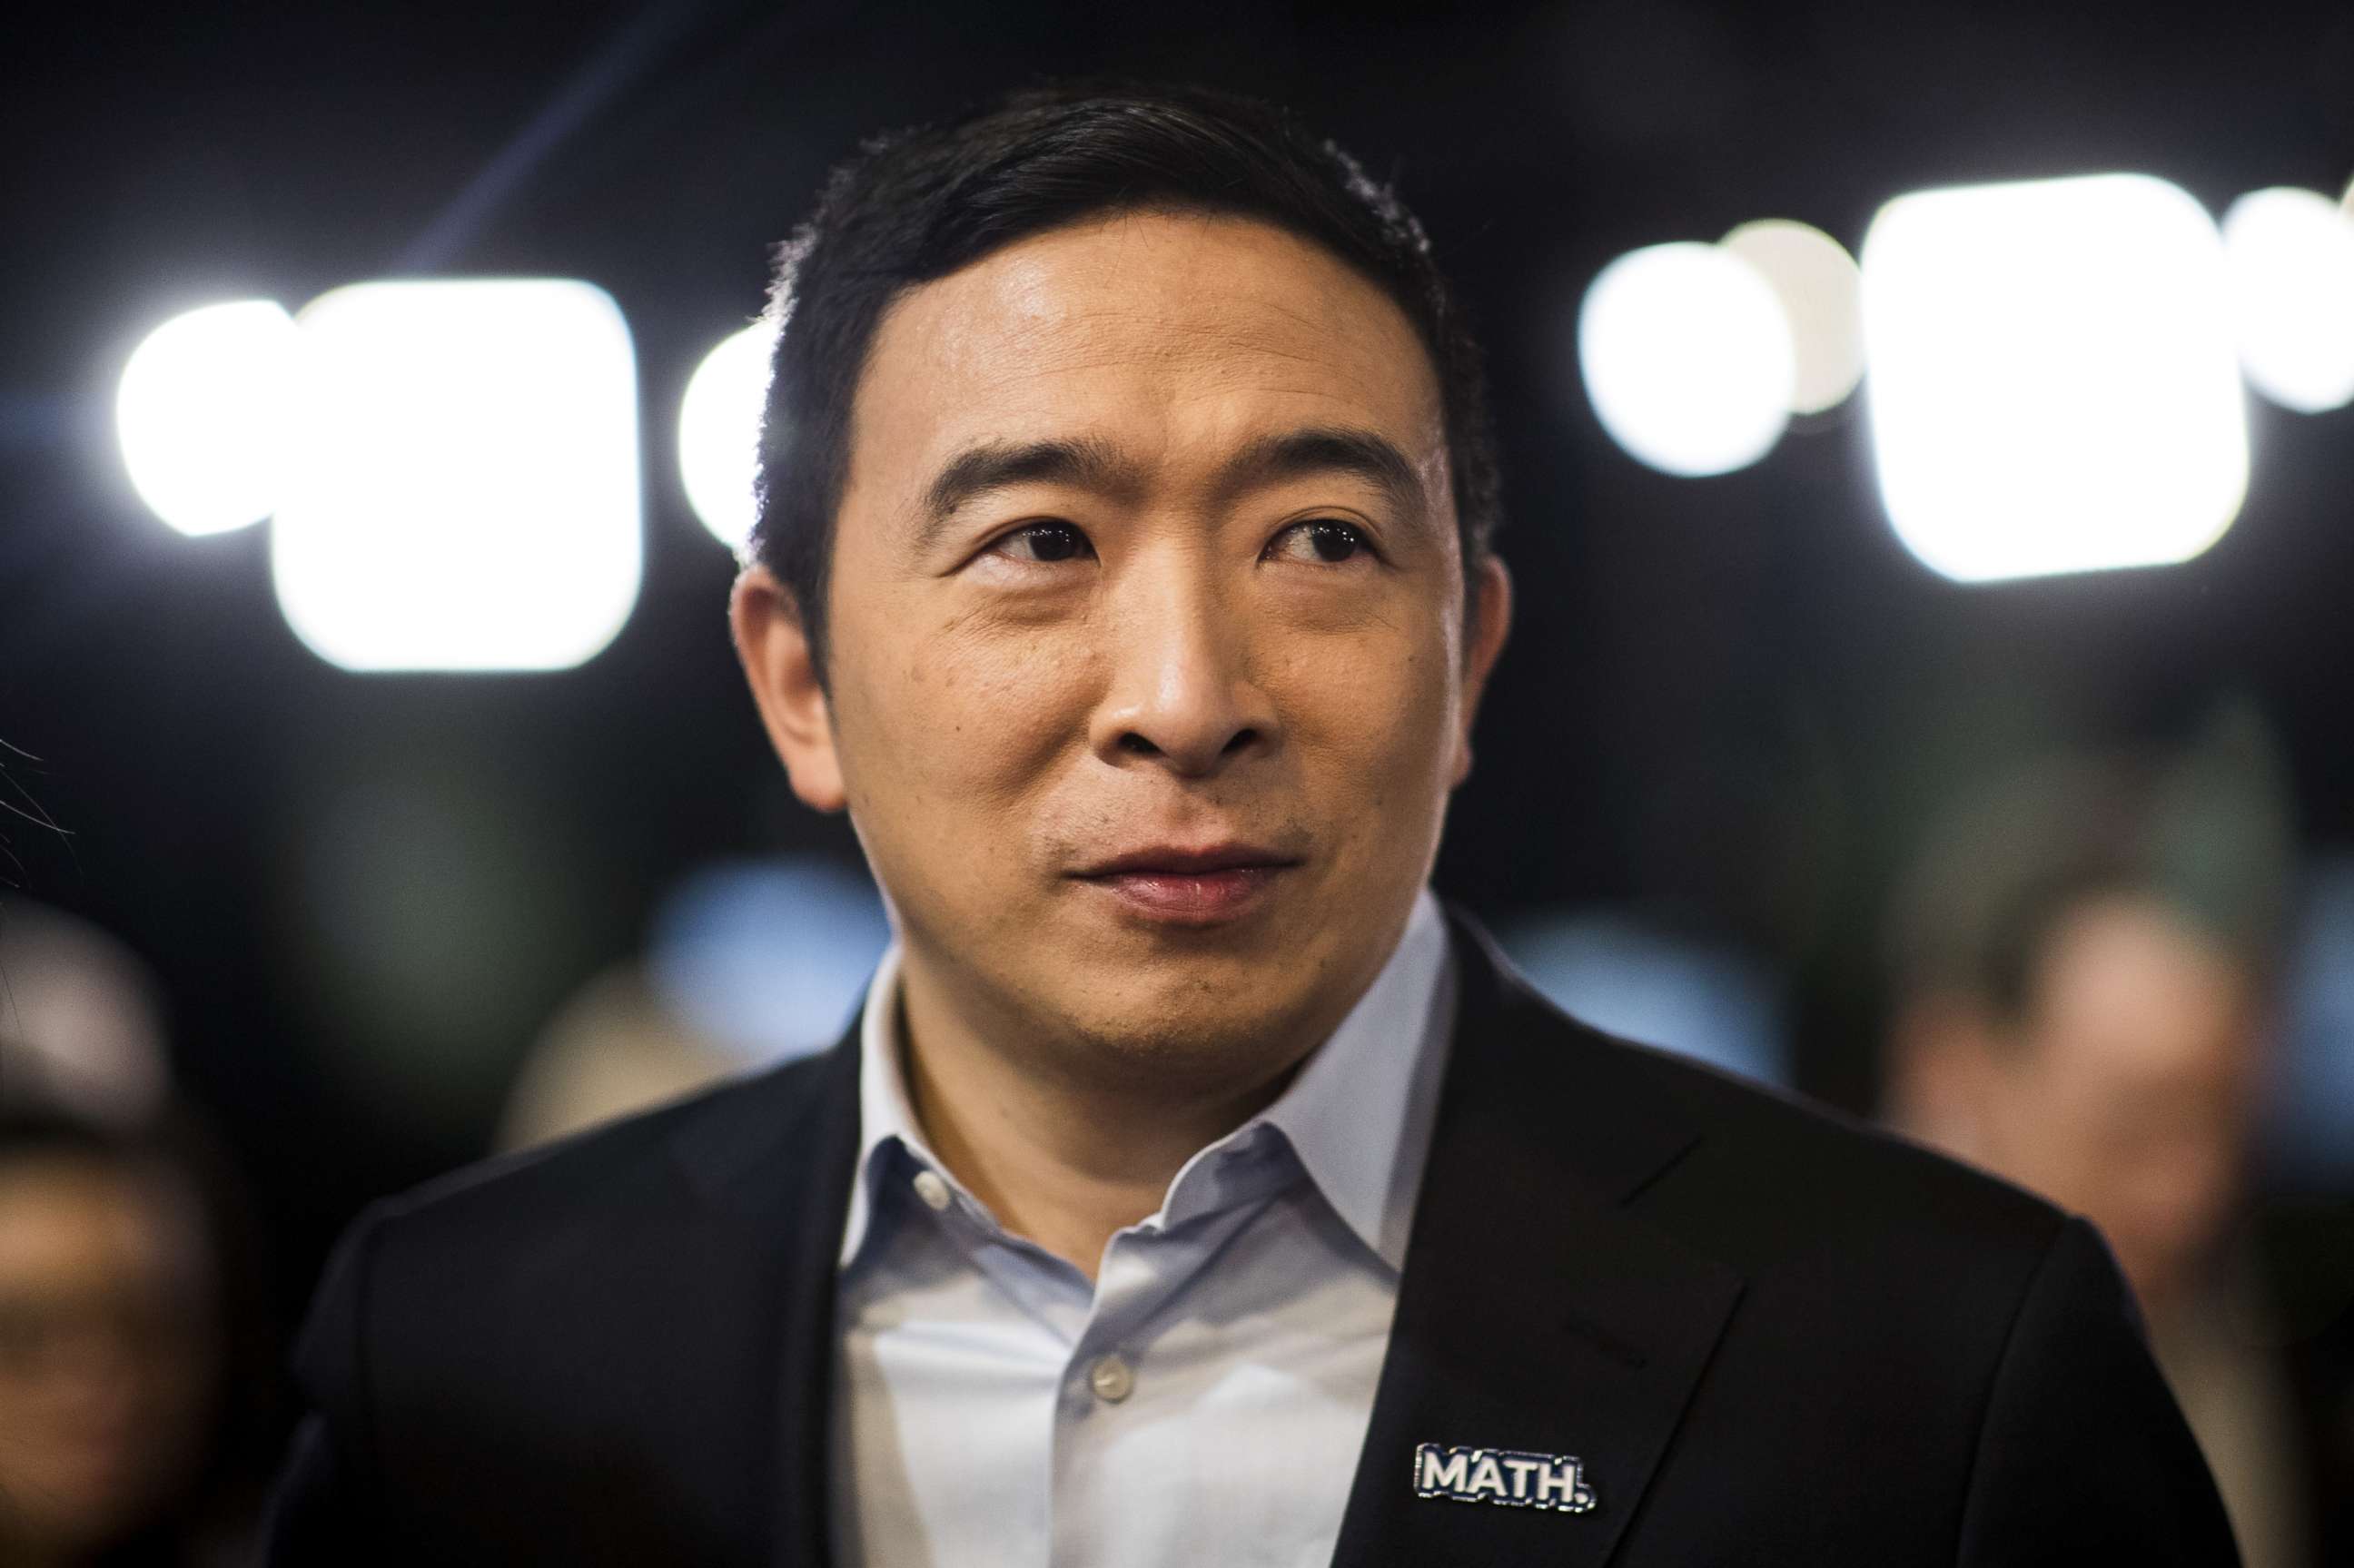 PHOTO: Andrew Yang stands in the spin room following the Democratic presidential debate at Saint Anselm College in Manchester, N.H., Feb. 7, 2020.